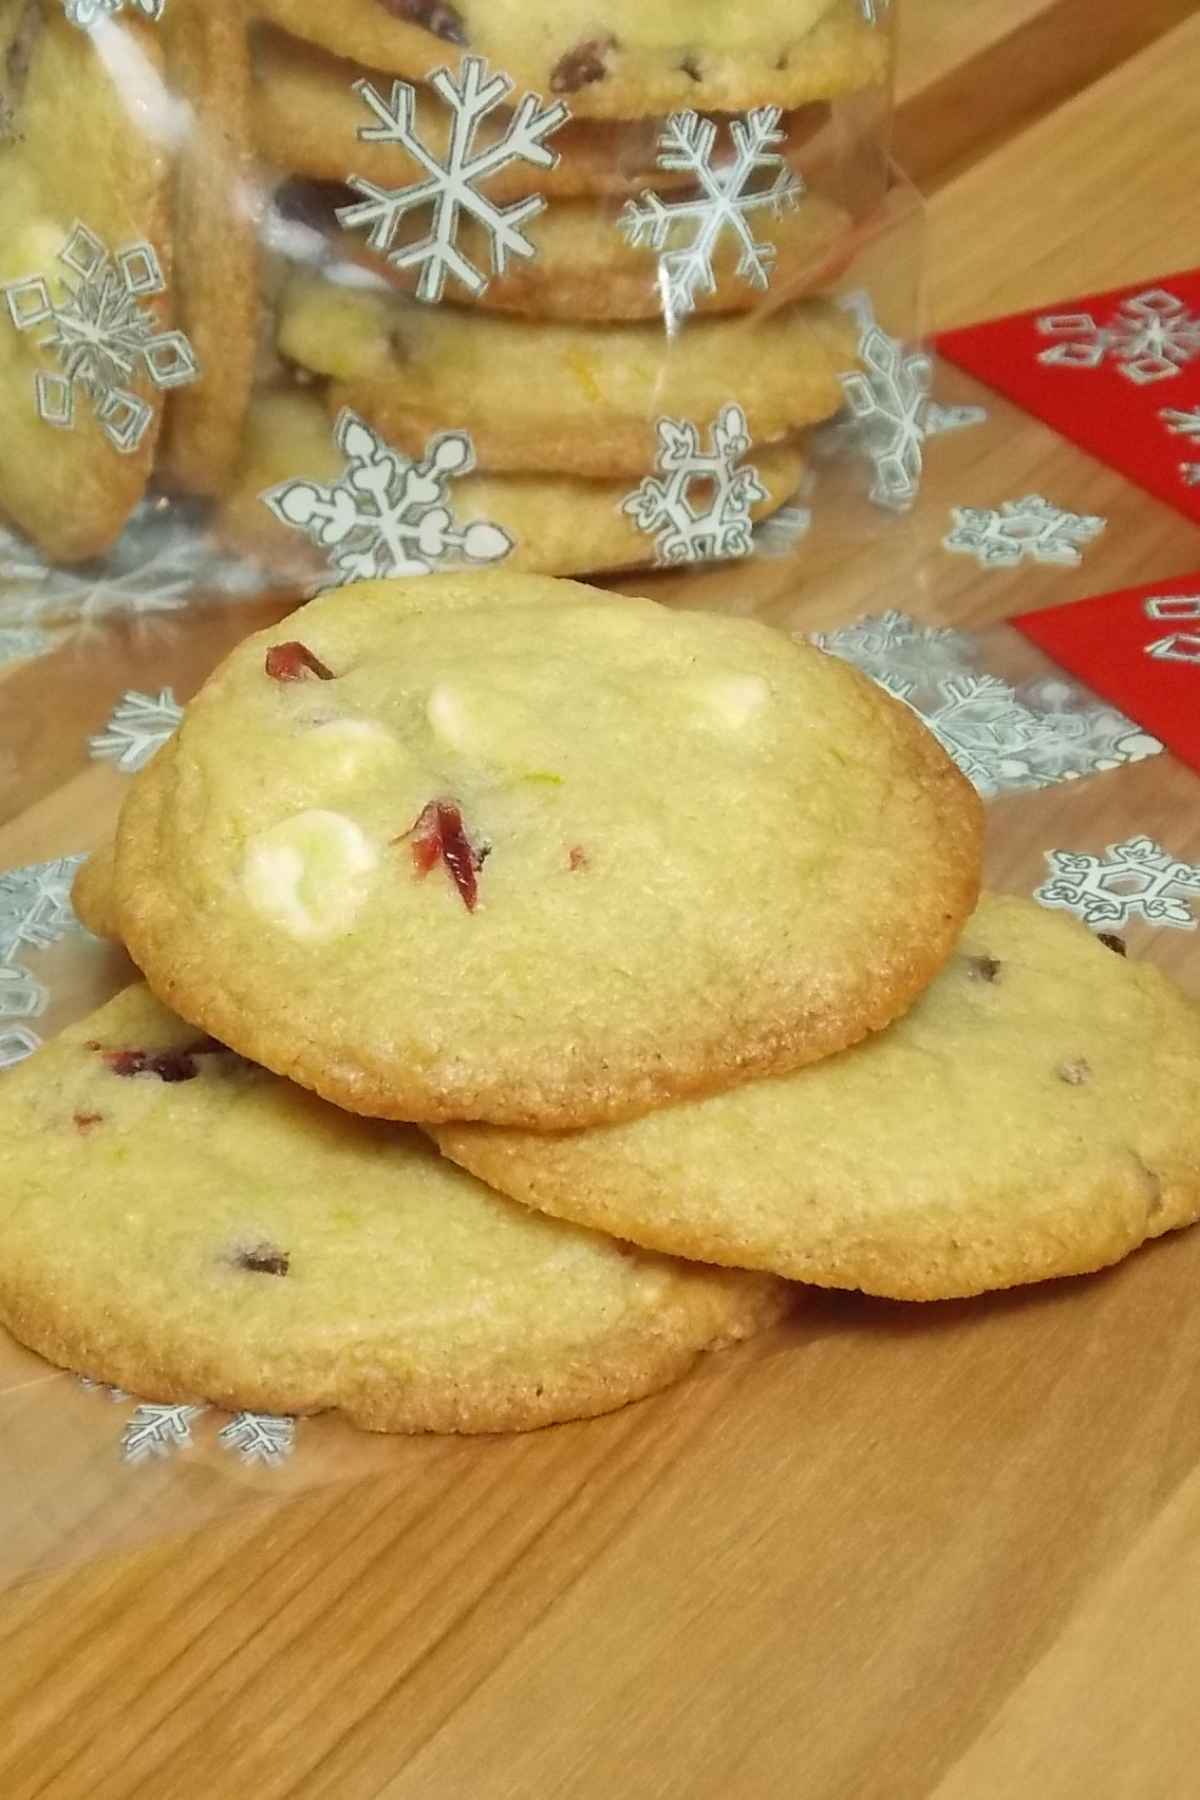 A pile of cookies ready to be bagged in Christmas food gift wrap.